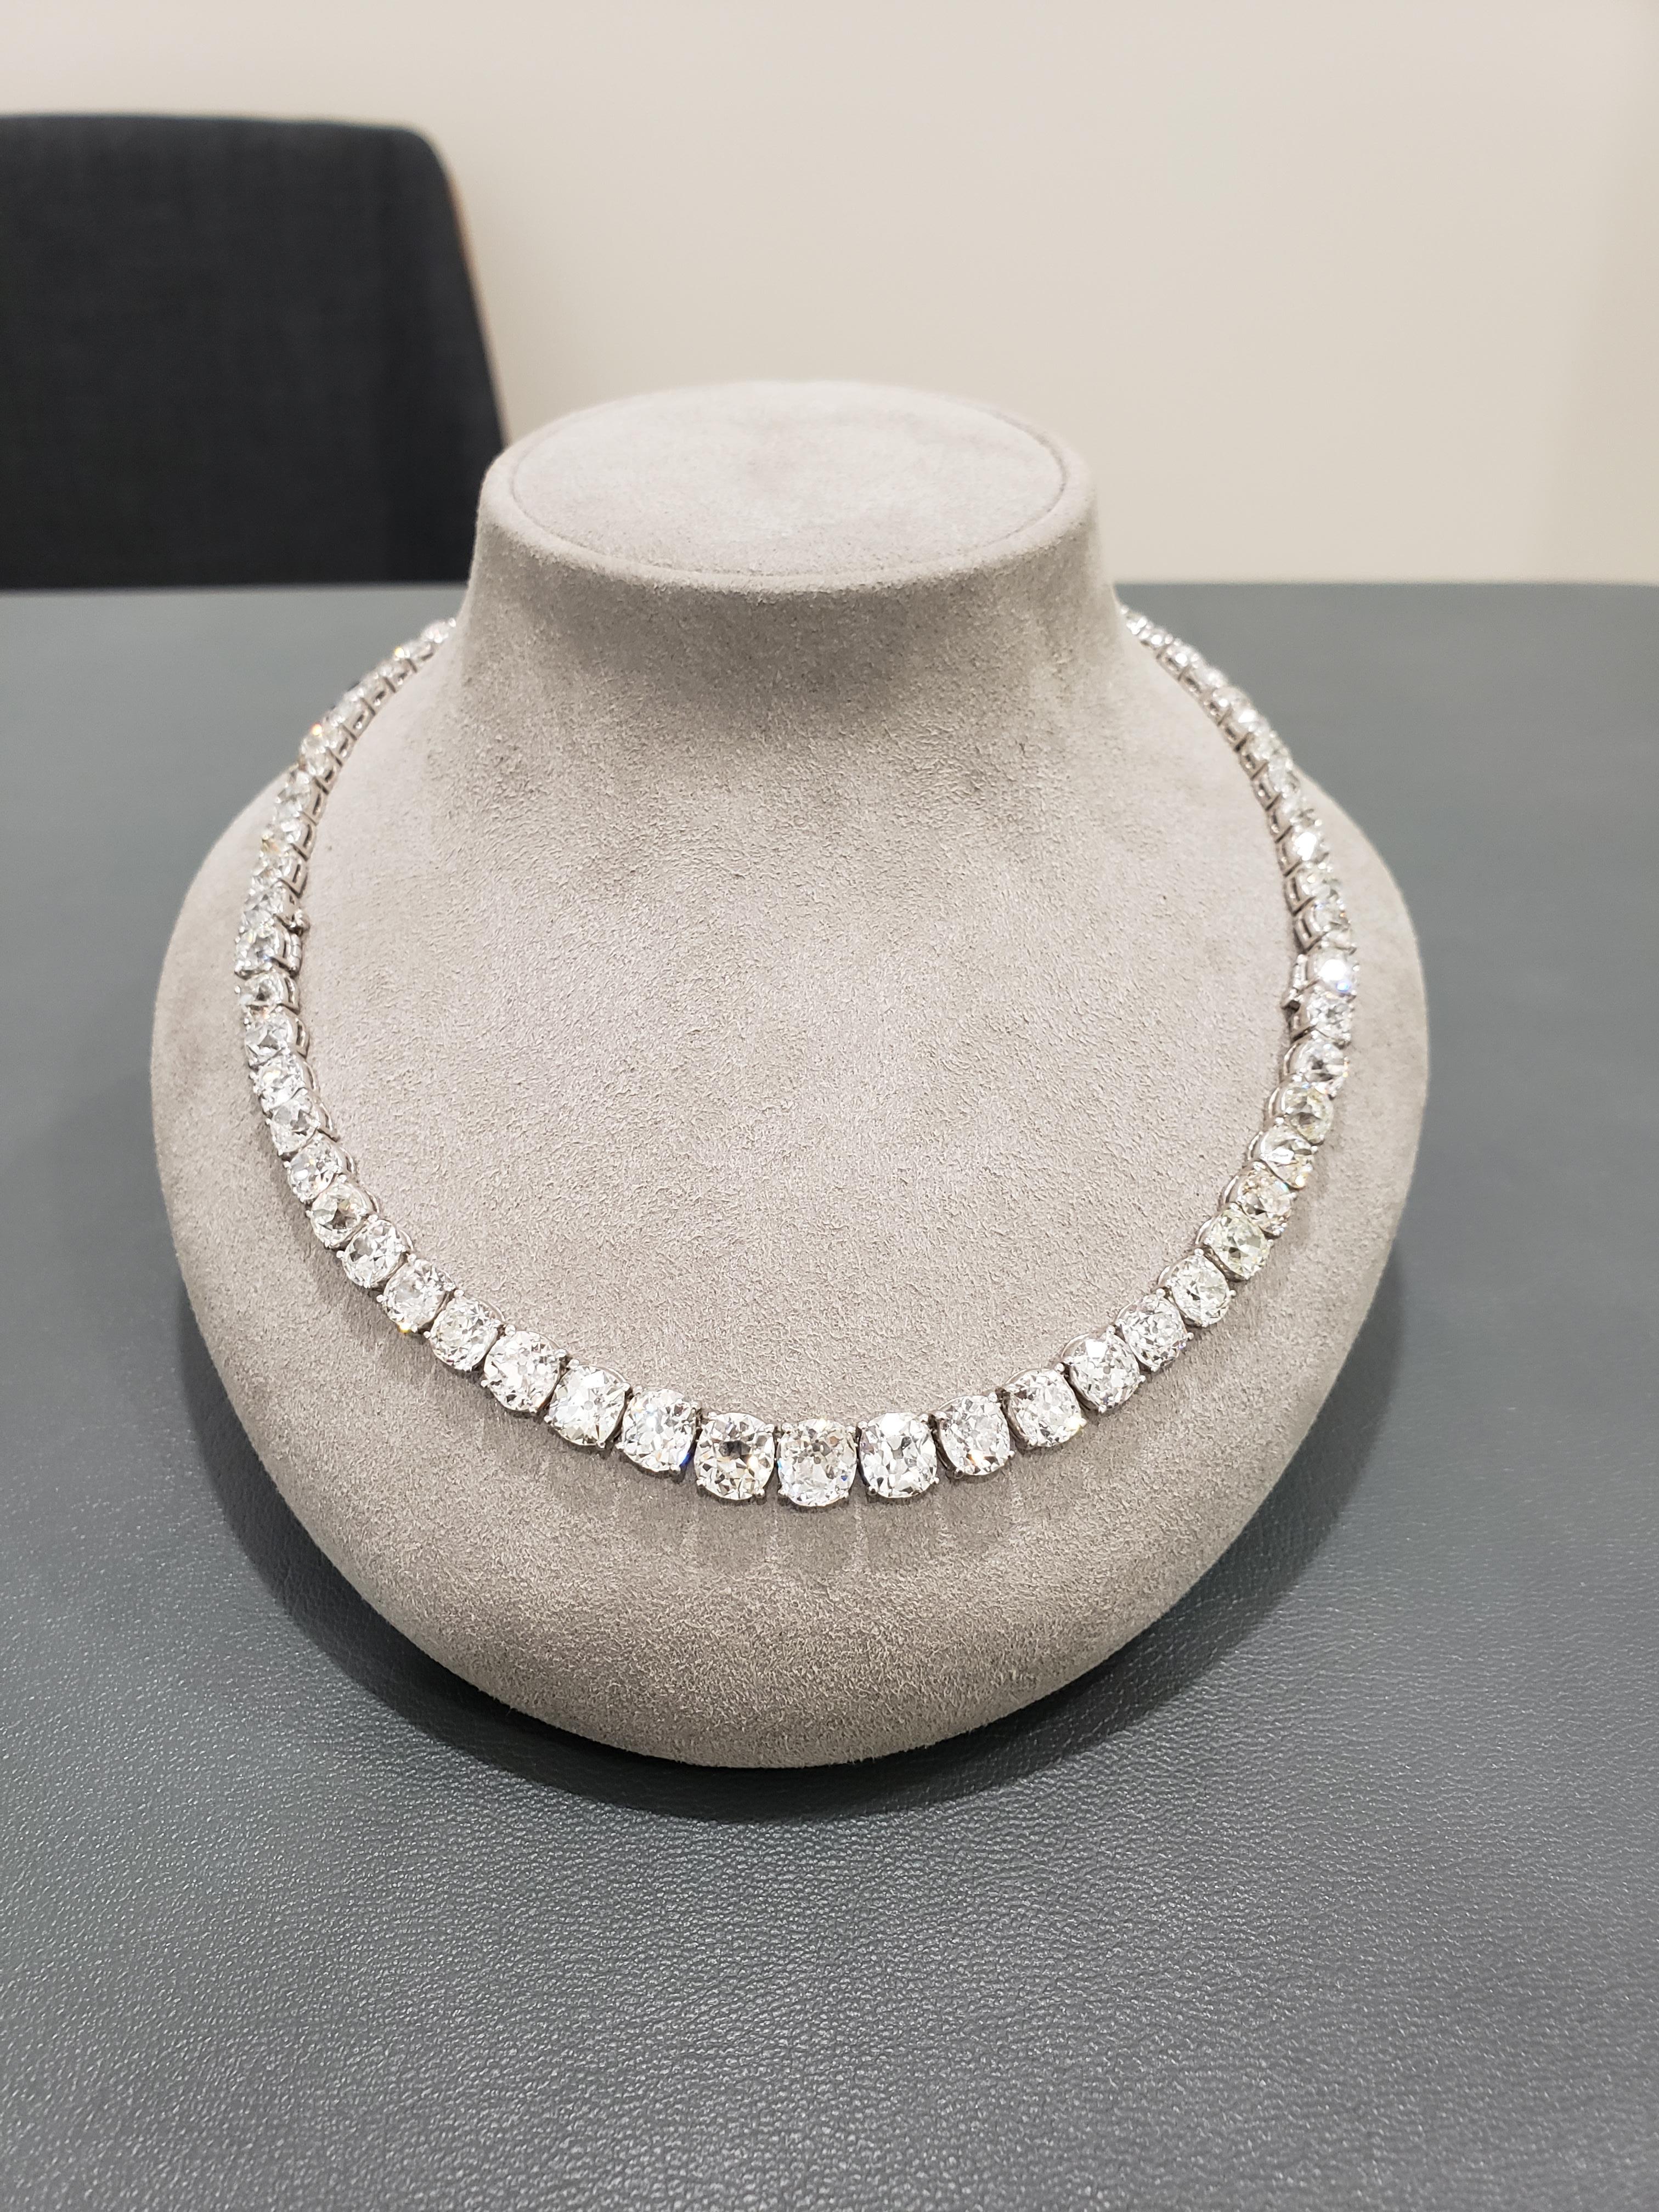 A custom made old mine cut diamond rivière platinum necklace, that is not eligible for return.

1.  The necklace will contain at minimum, 60-65 carats of natural diamonds set in platinum, 16.5 inches in length. The loose stones will be weighed and